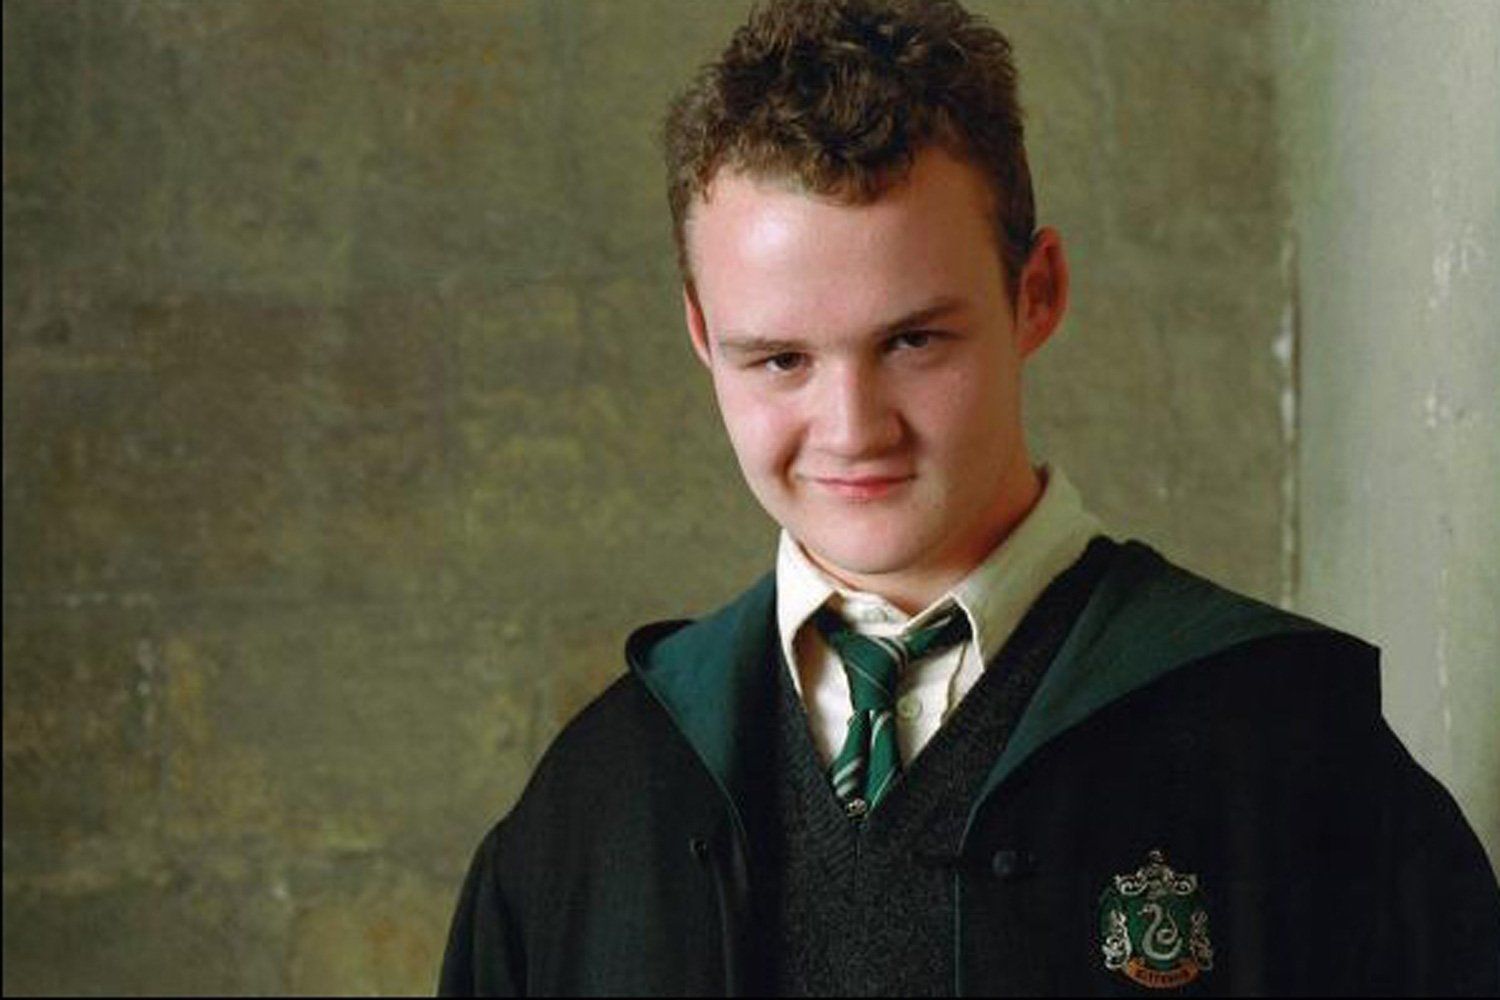 Who played the character of Gregory Goyle in the Harry Potter films?